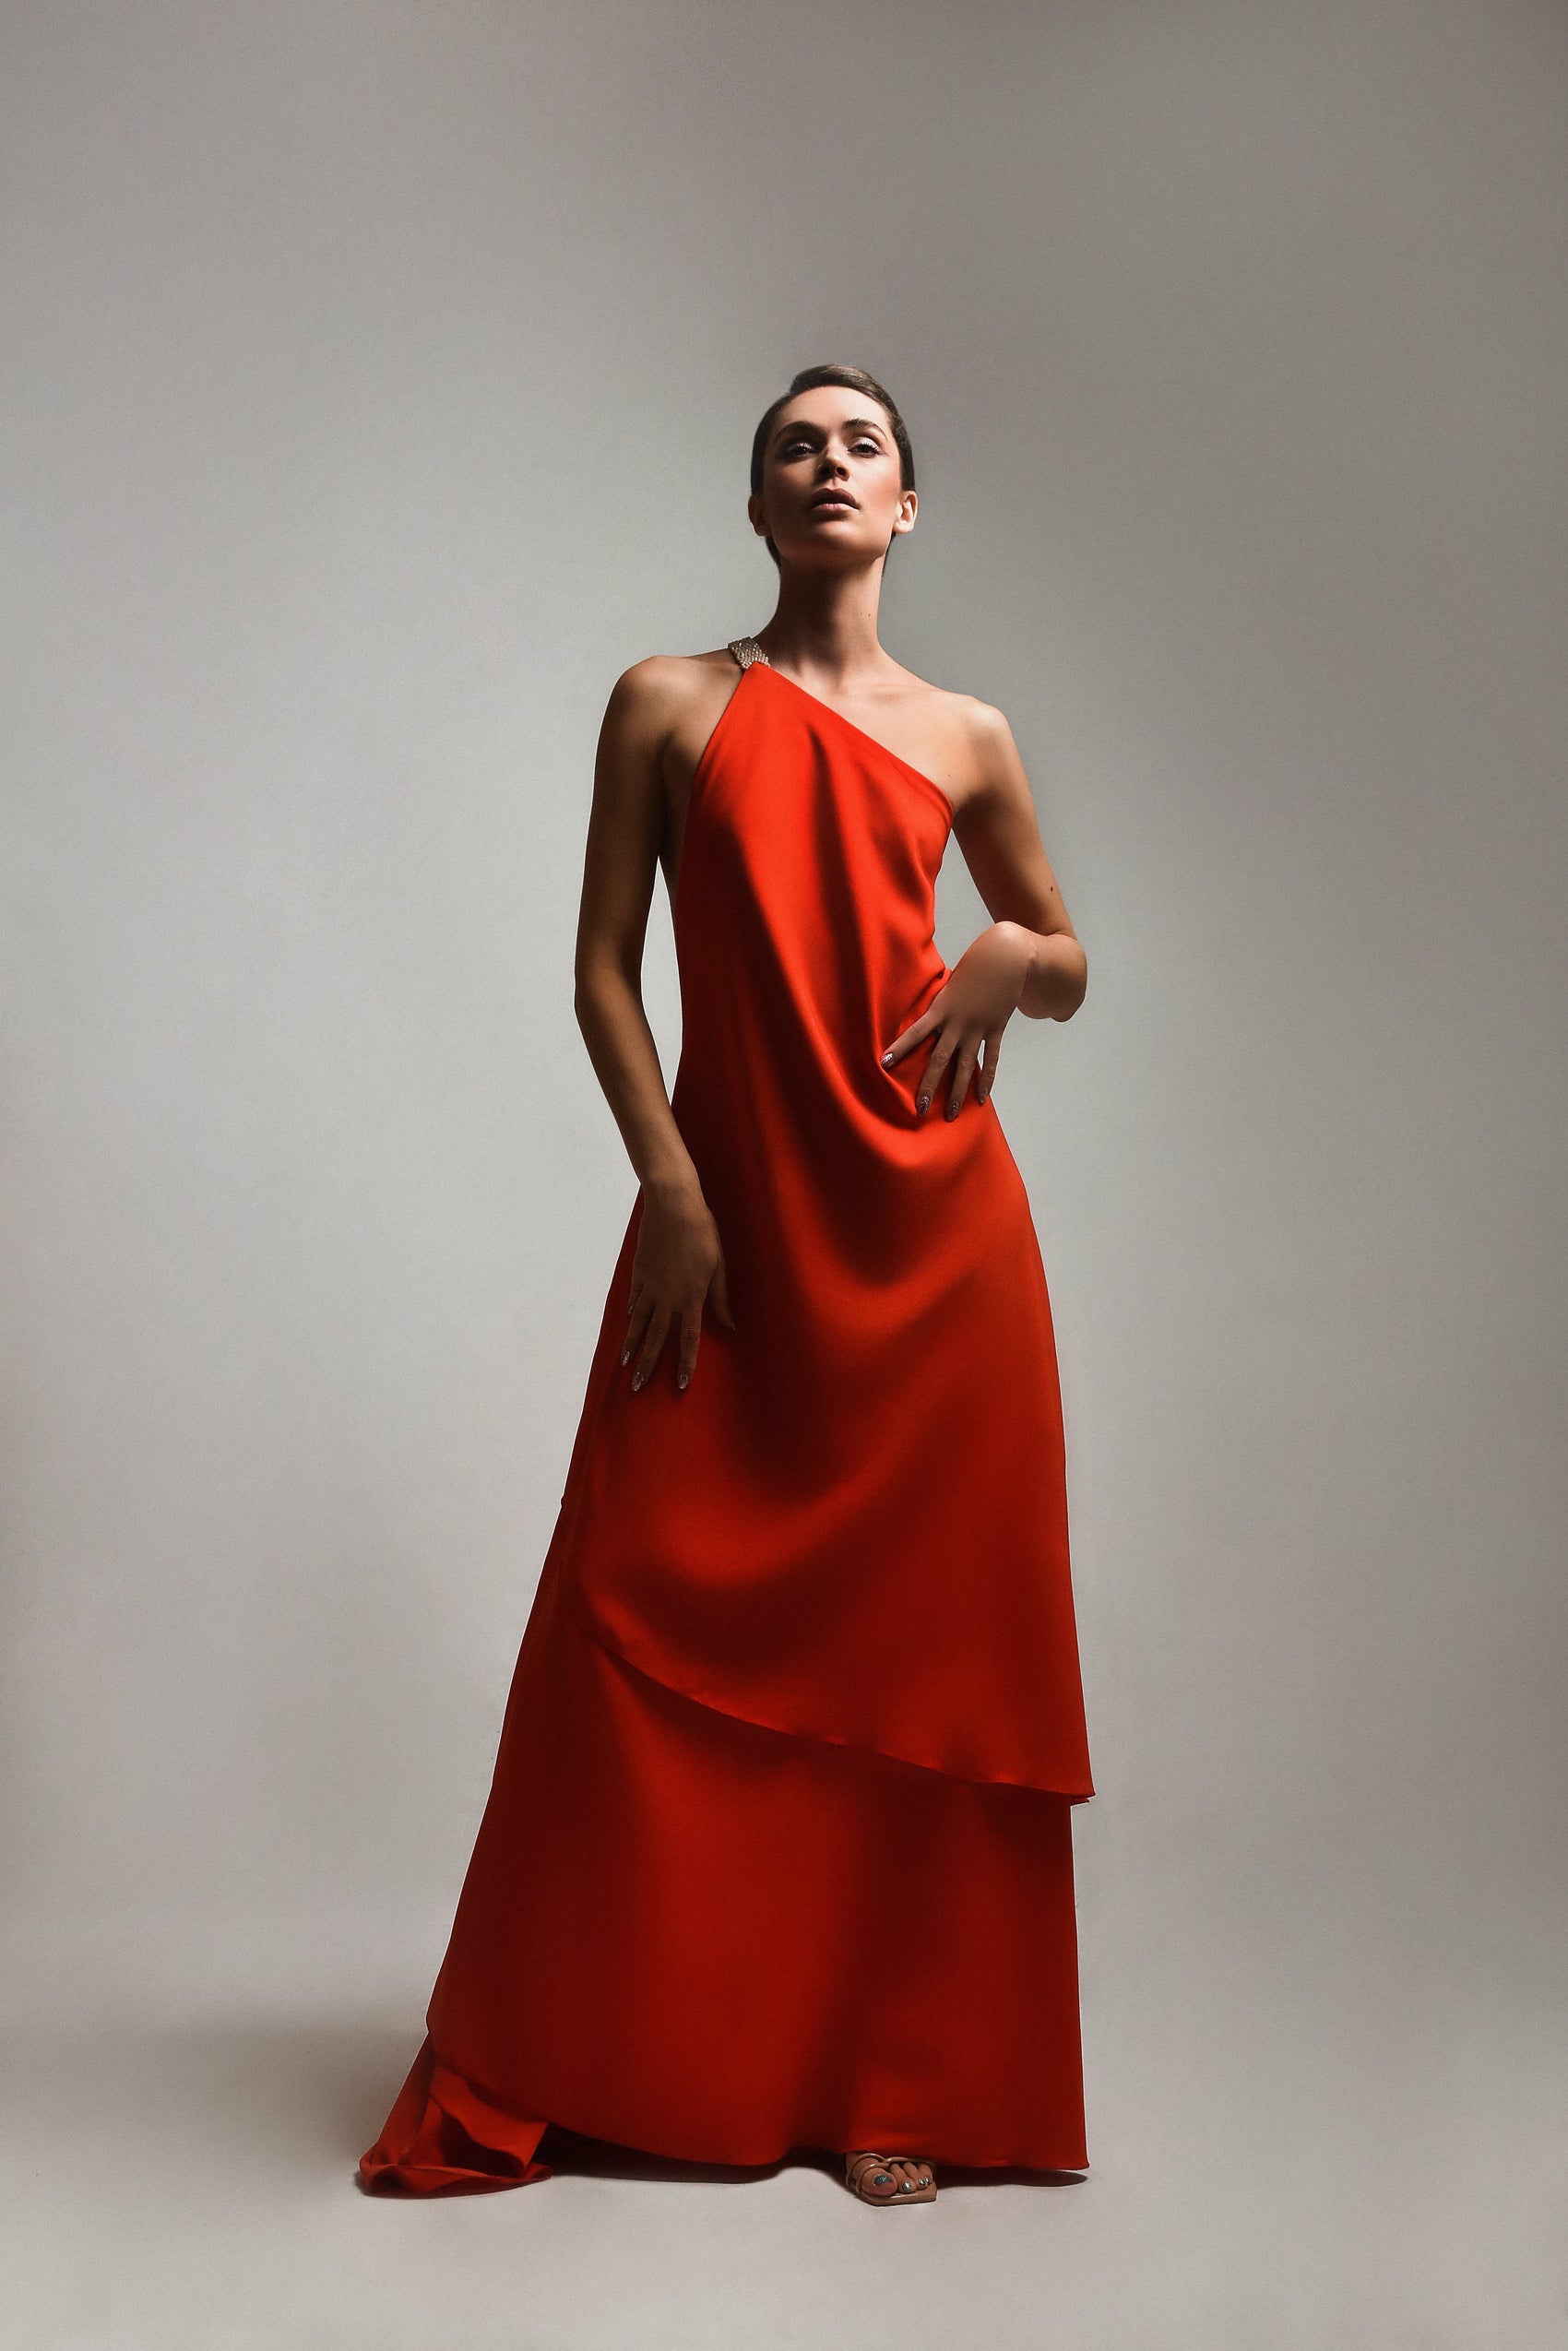 Red dress with an open back and belt with stones sewn by hand